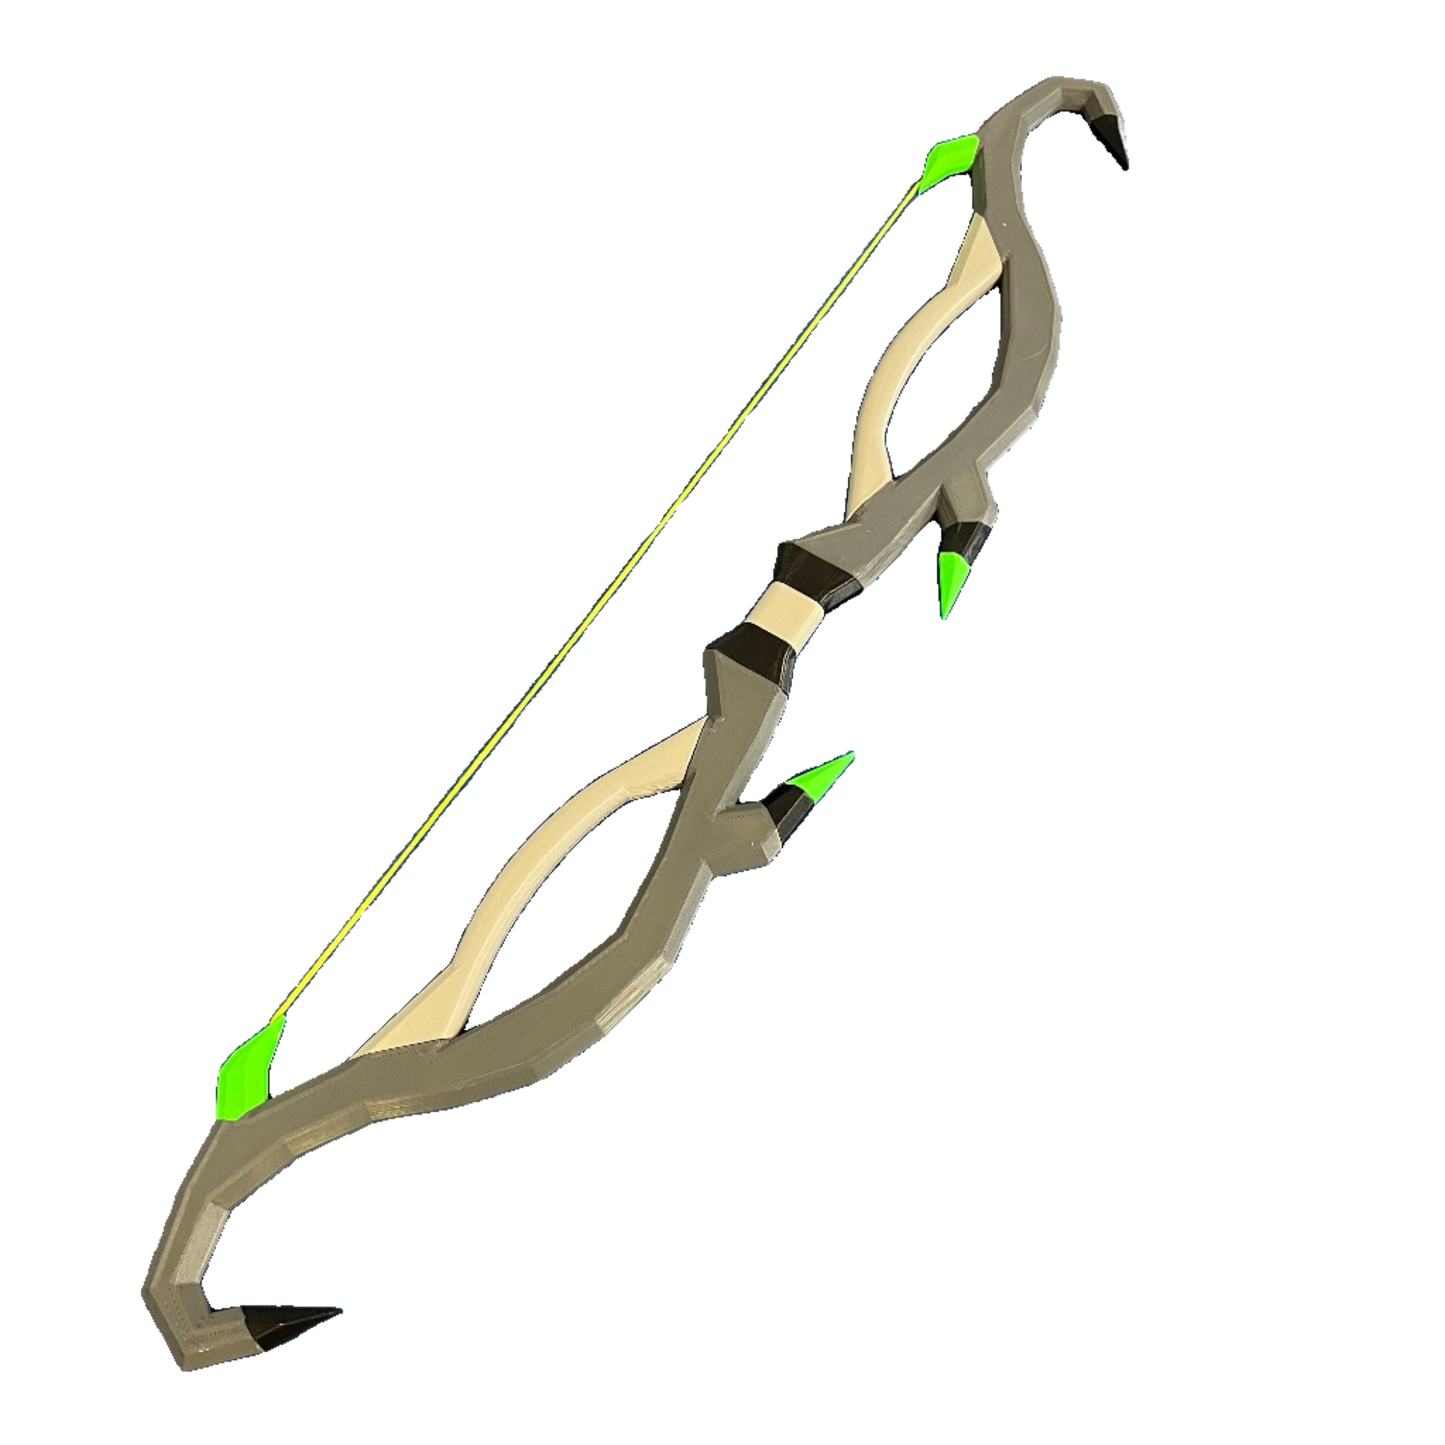 Twisted Bow based on OSRS / RuneScape Costume Cosplay / Full Life Size